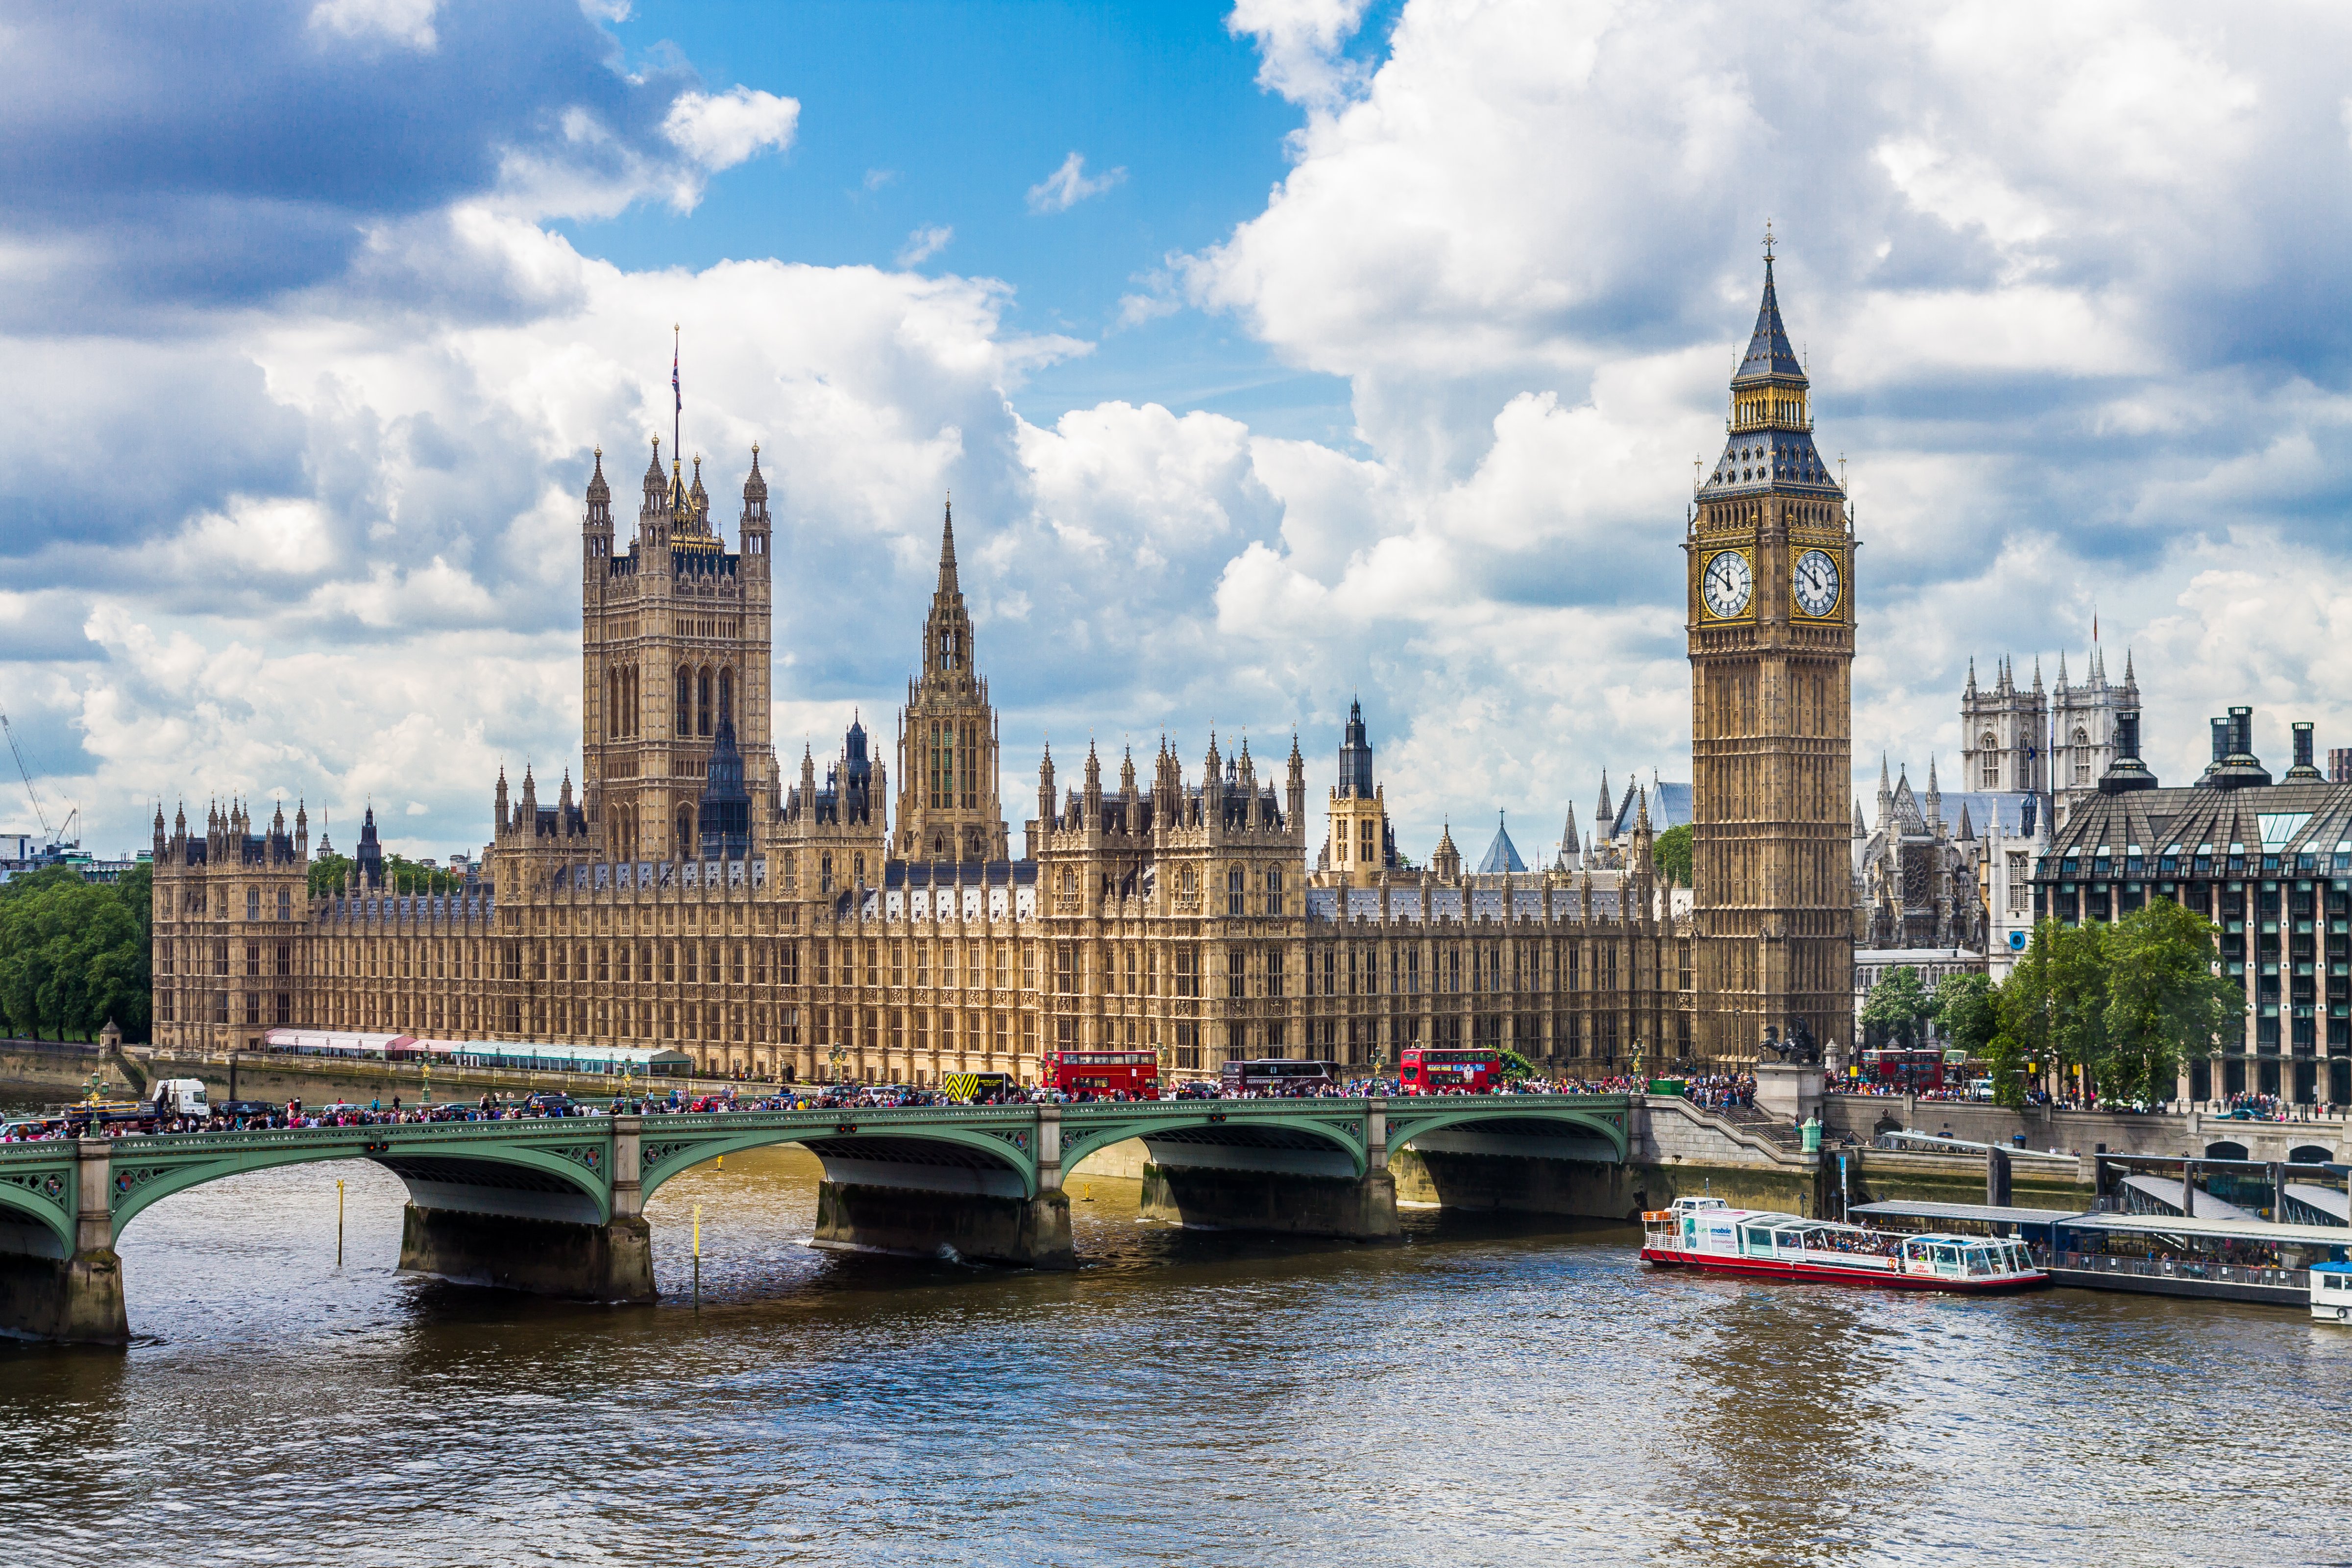 Thames river, Big Ben and the House of Parliament. (Victor Cardoner&mdash;Getty Images)